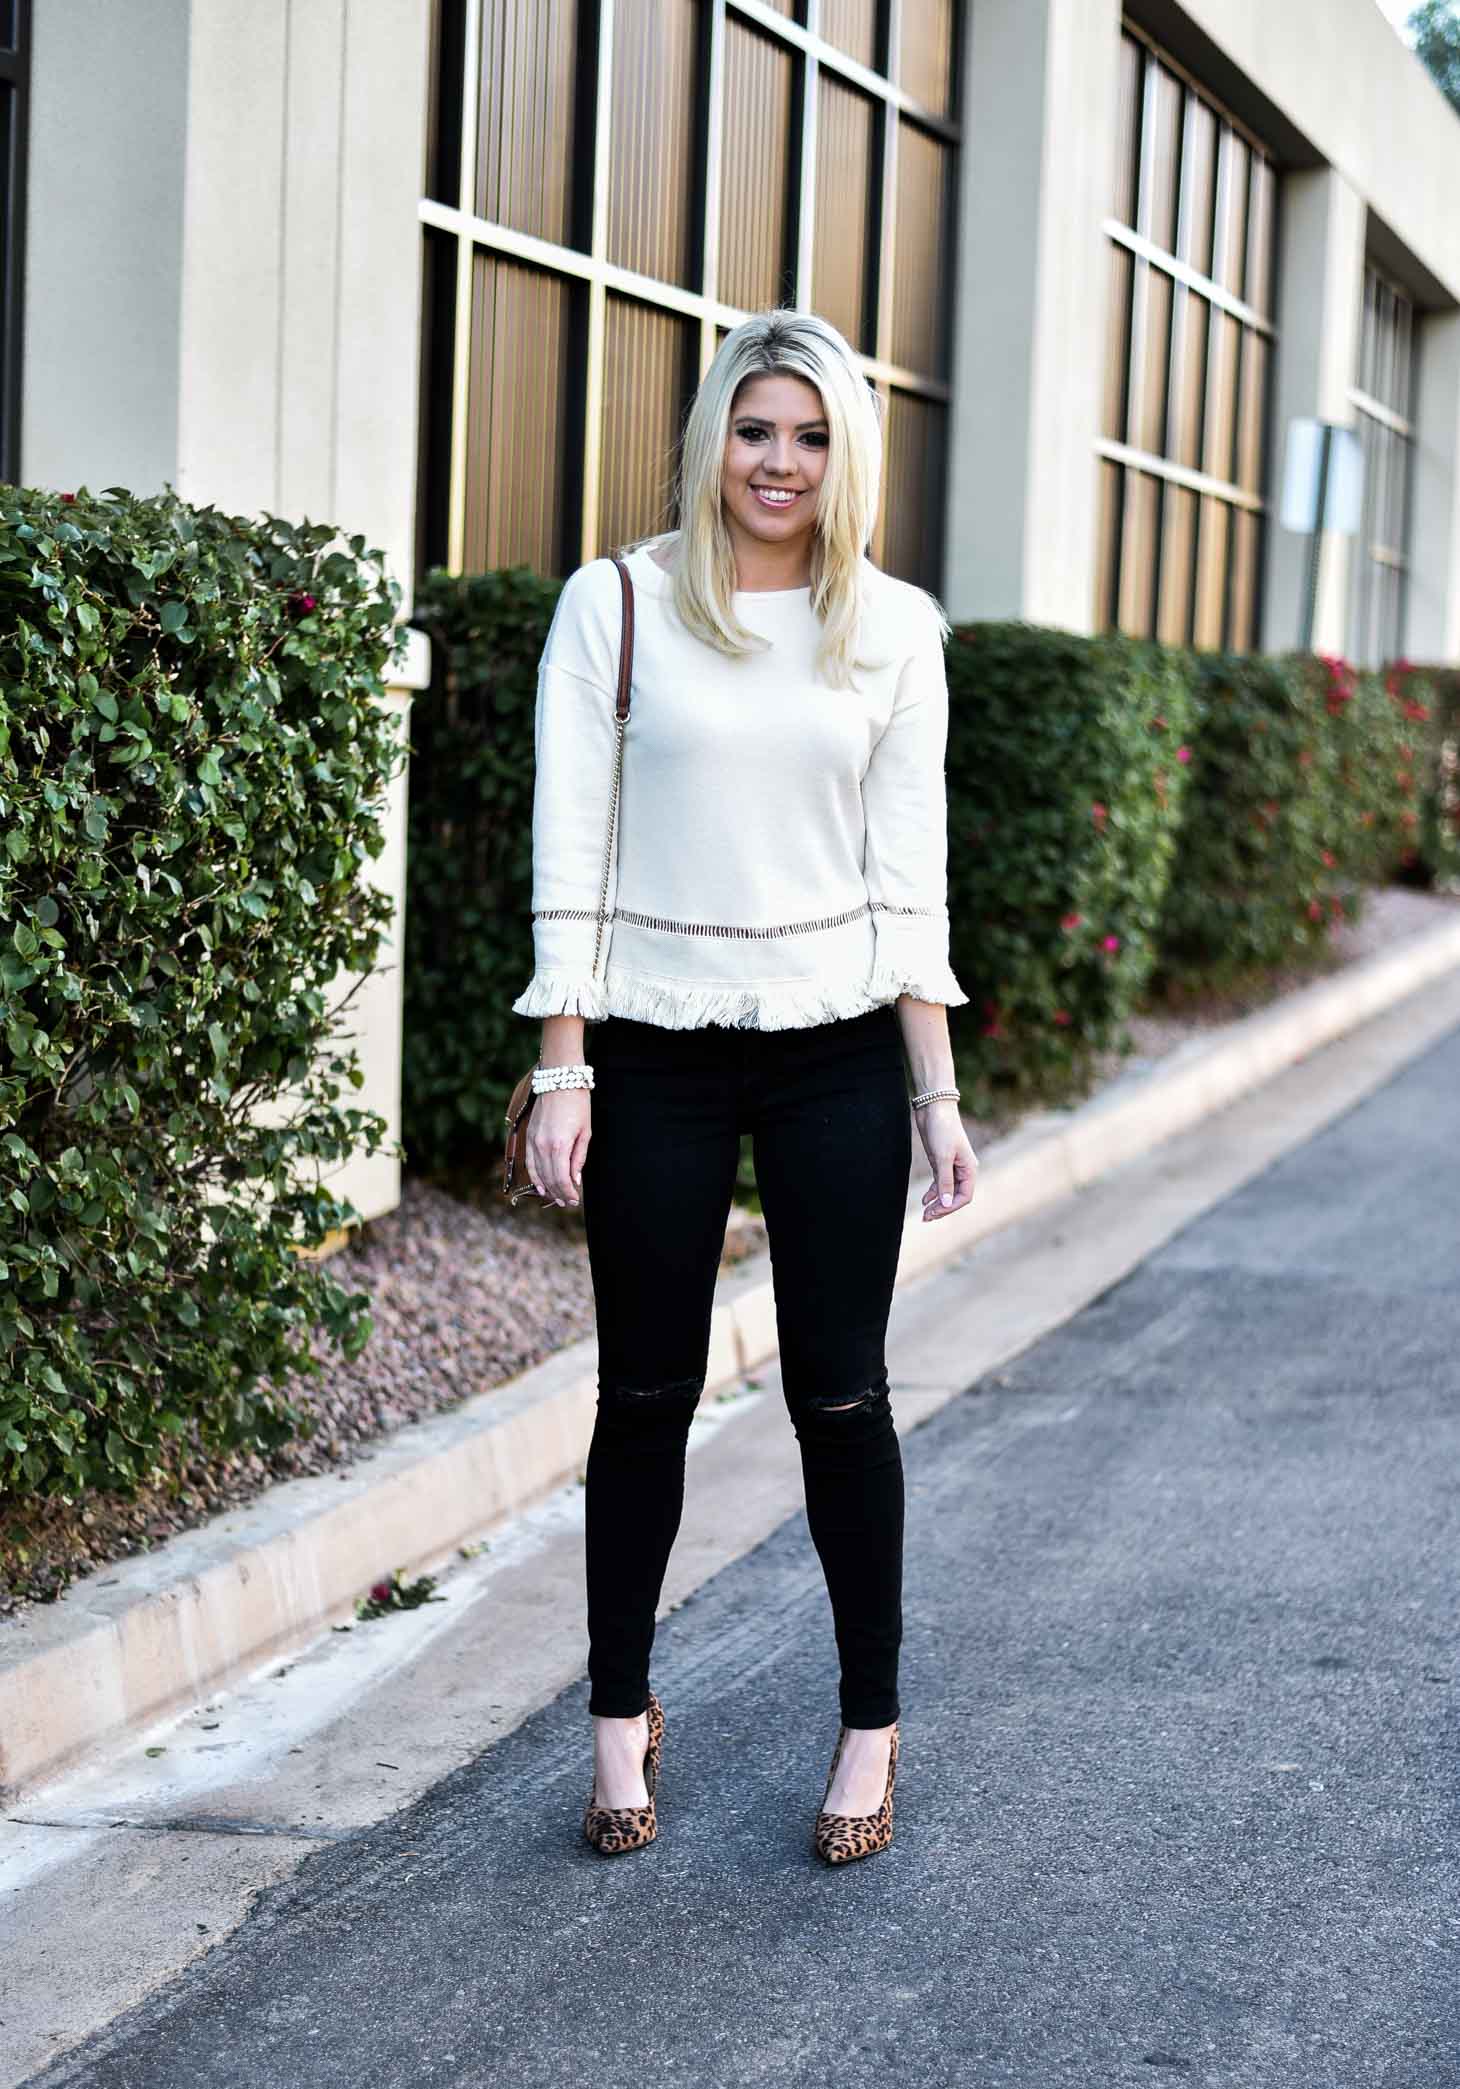 Erin Elizabeth of Wink and a Twirl in Cream Fringe Top by VIS